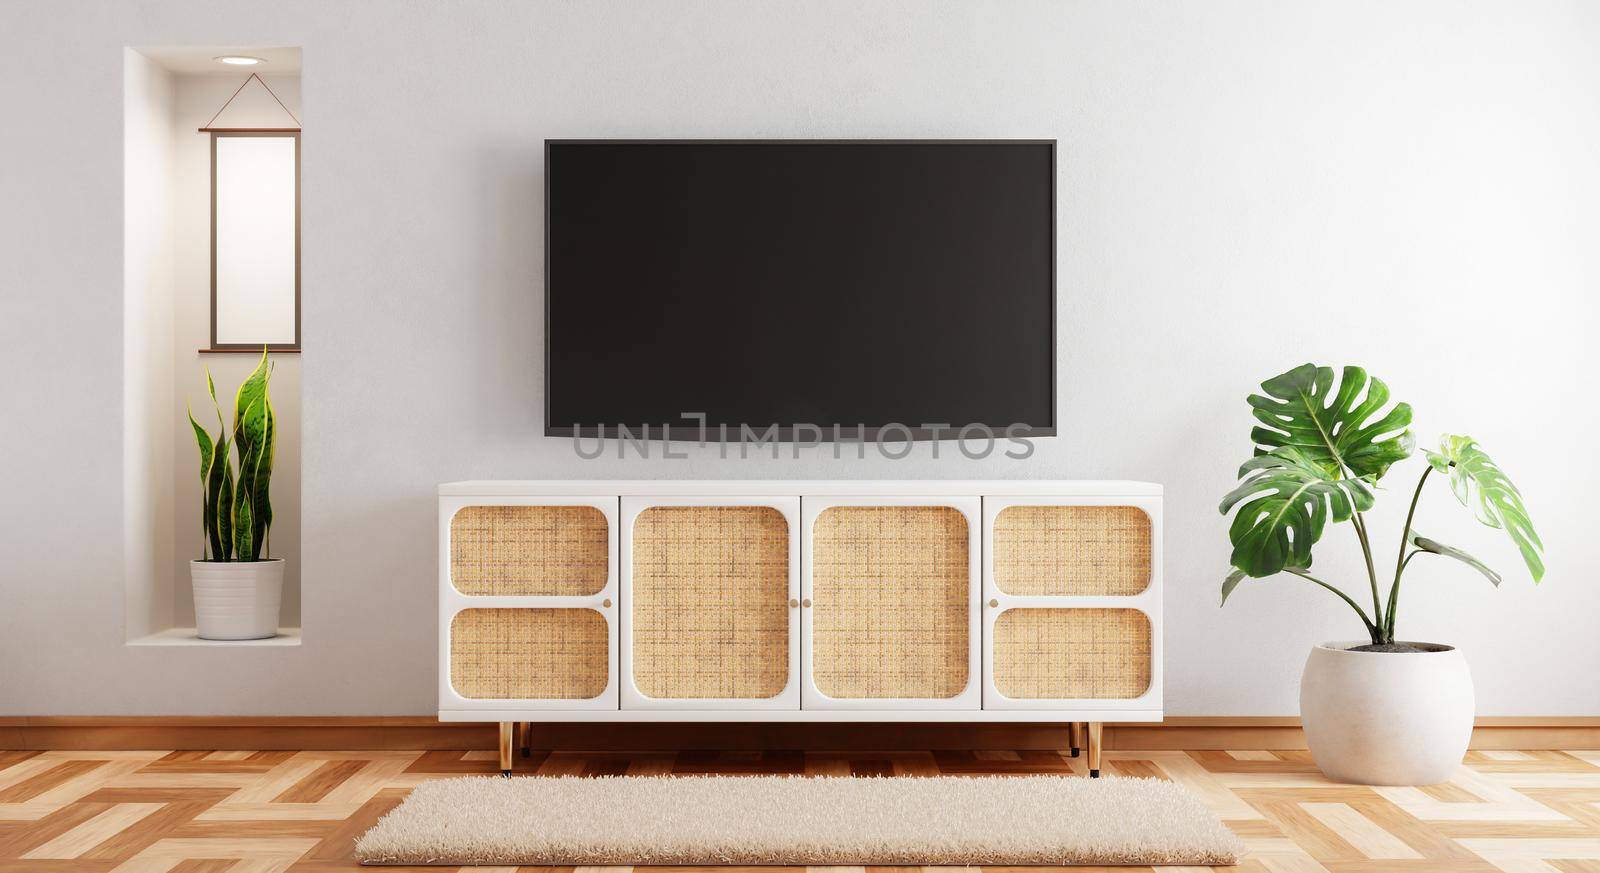 TV above wooden cabinet in modern empty room with plants carpet on wooden background. Japanese style theme. Architecture and interior concept. 3D illustration rendering by MiniStocker